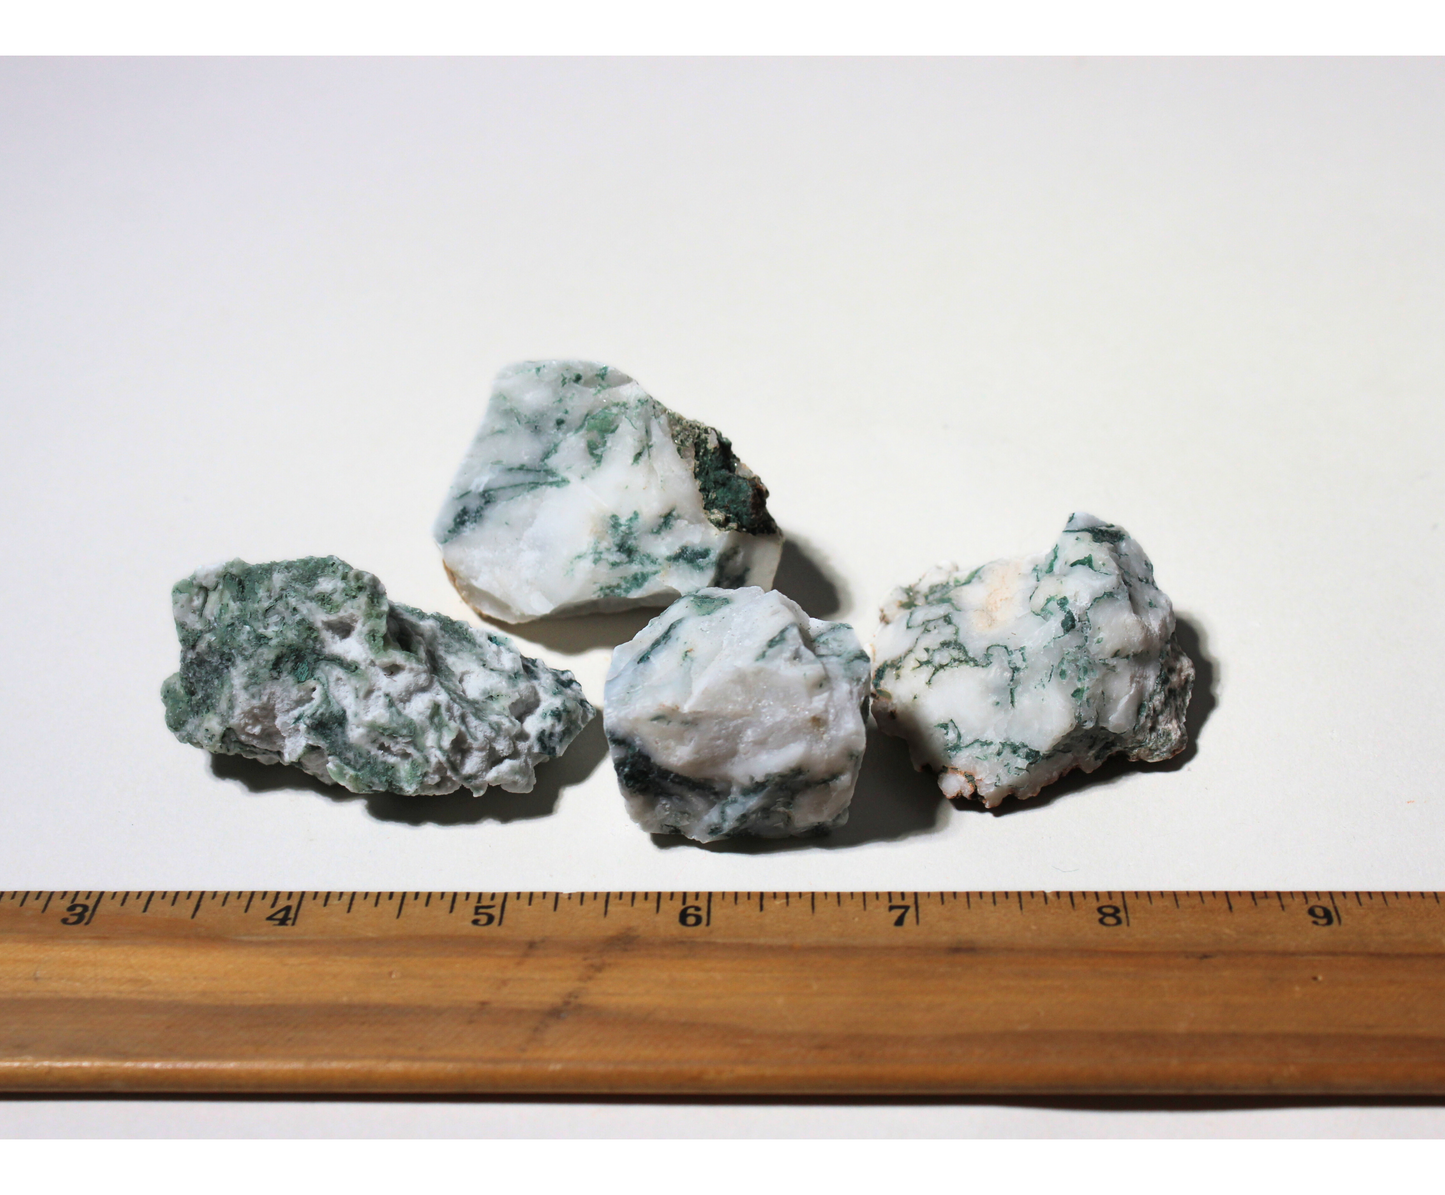 Tree Agate I Tumbling Rough Rocks from India I 1" - 2" Raw Crystals